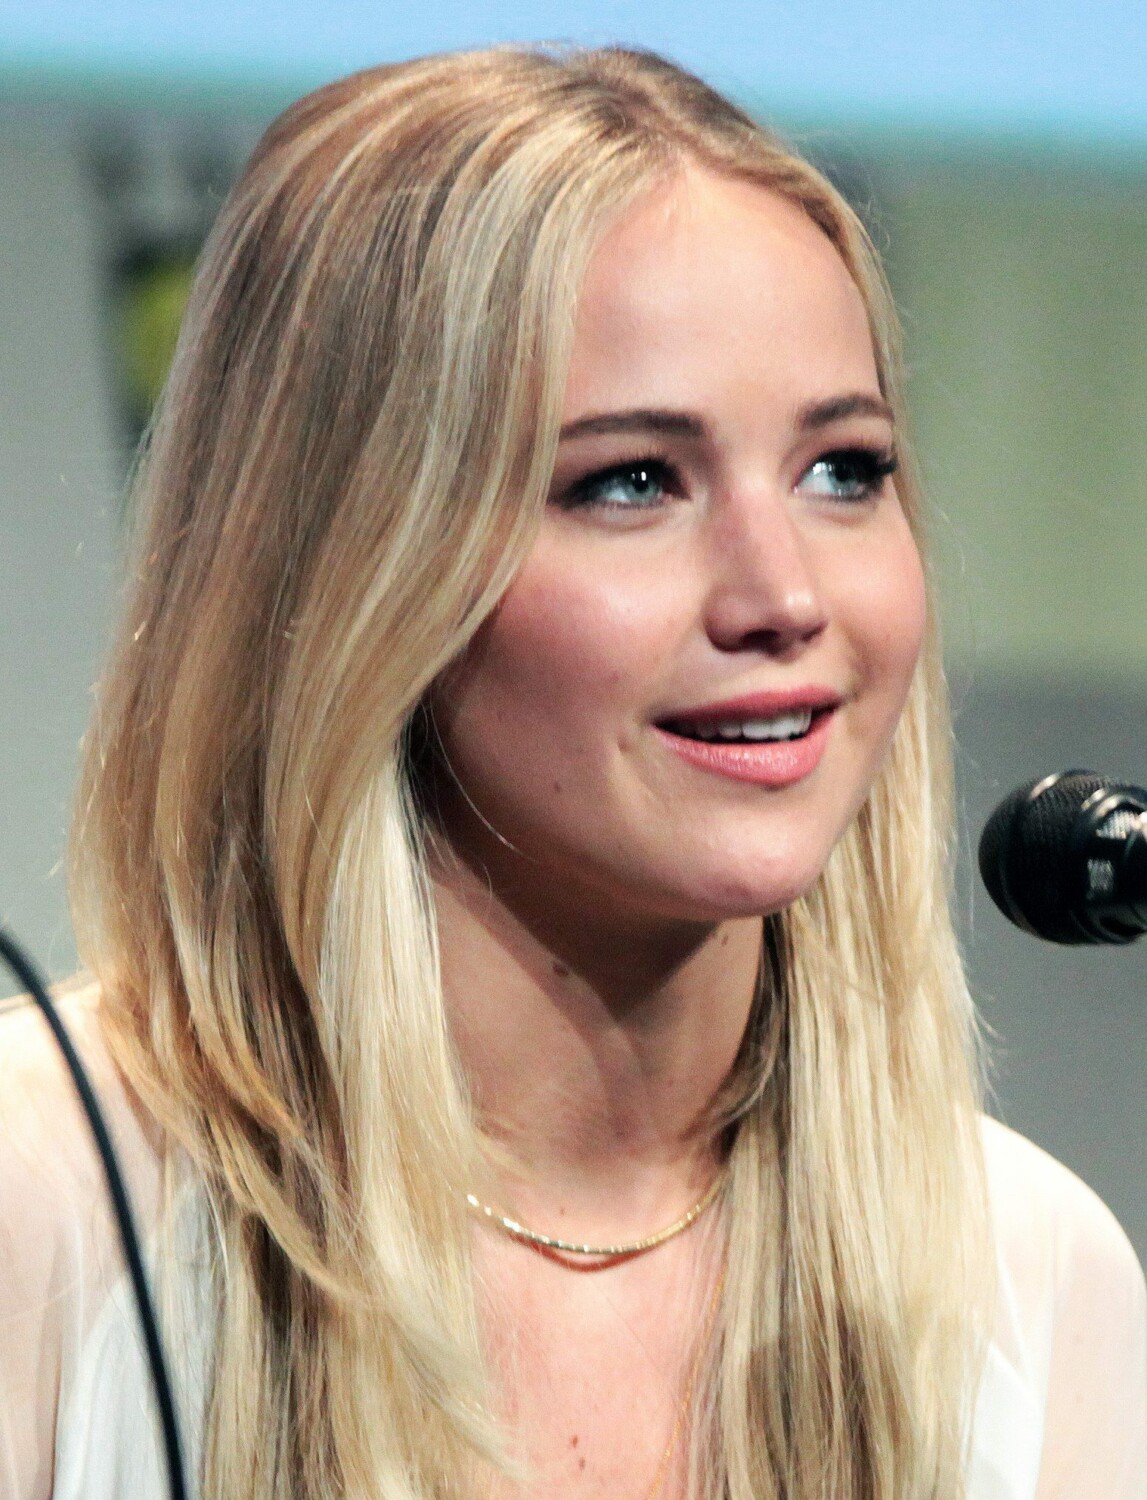 Jennifer Lawrence. De Gage Skidmore - www.flickr.com/photos/gageskidmore/19764935991/in/photolist, CC BY-SA 4.0, https://commons.wikimedia.org/w/index.php?curid=41796885